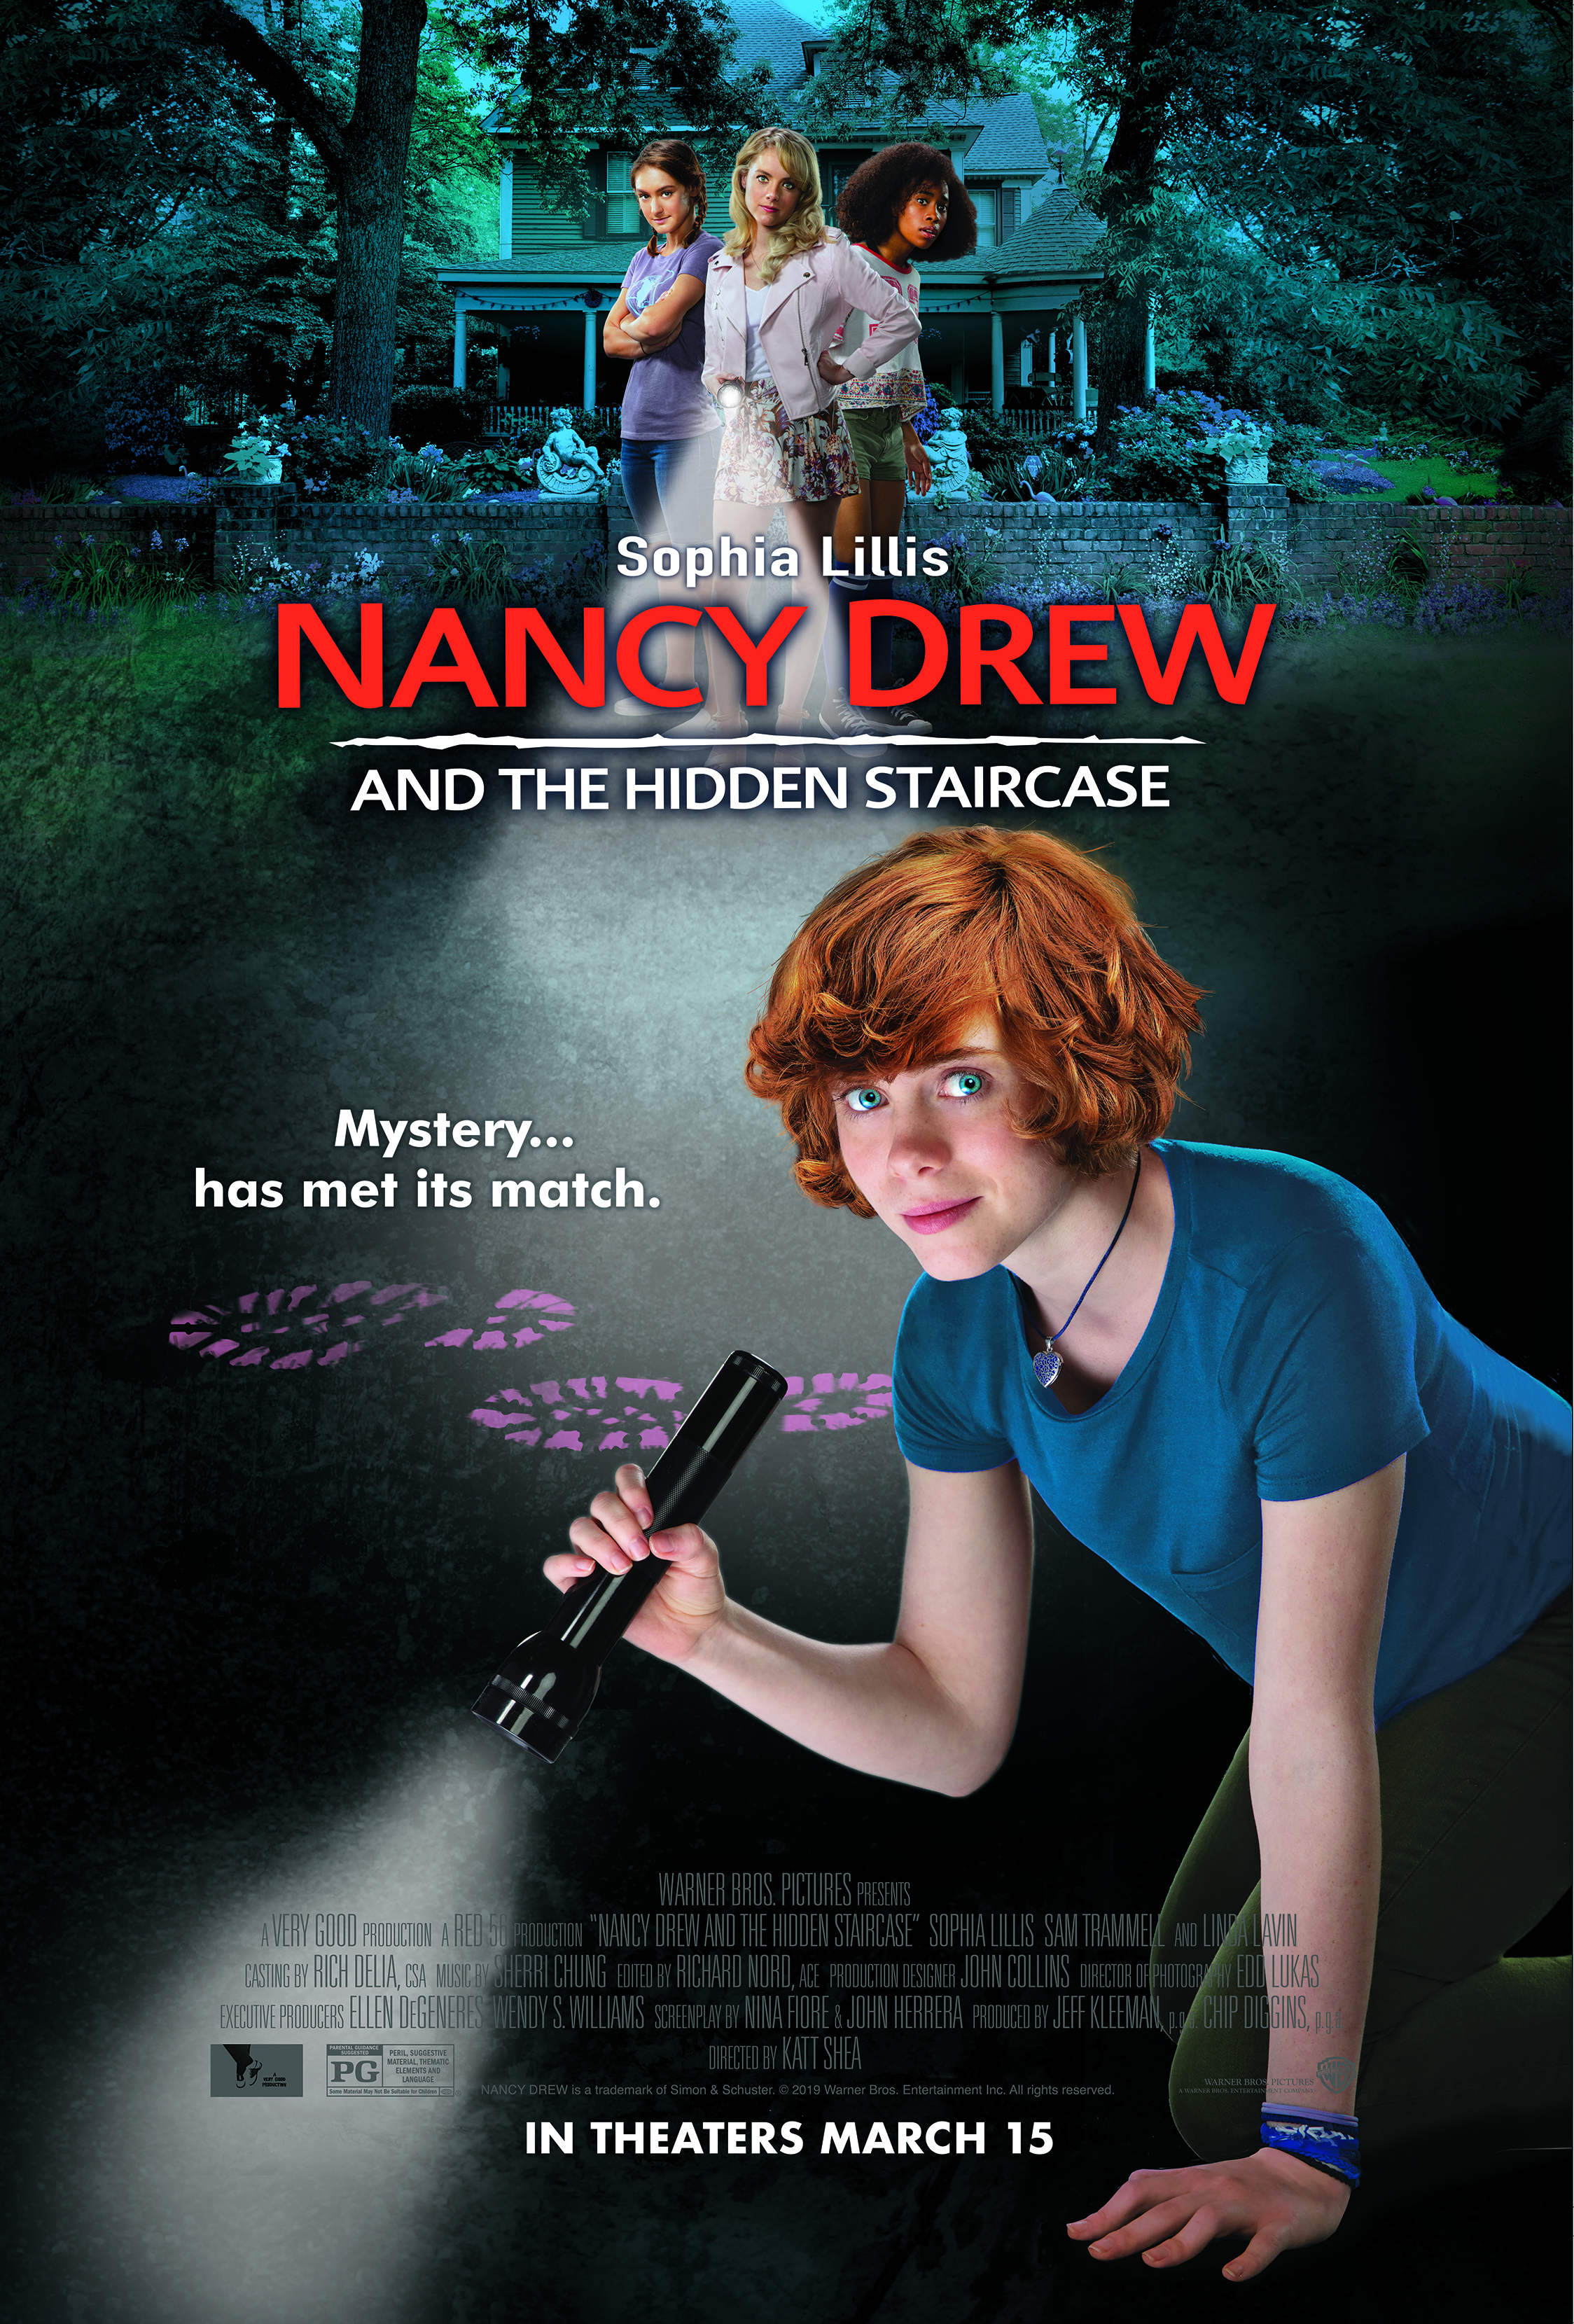 Nancy Drew and the Hidden Staircase Seeks New Generation This March!